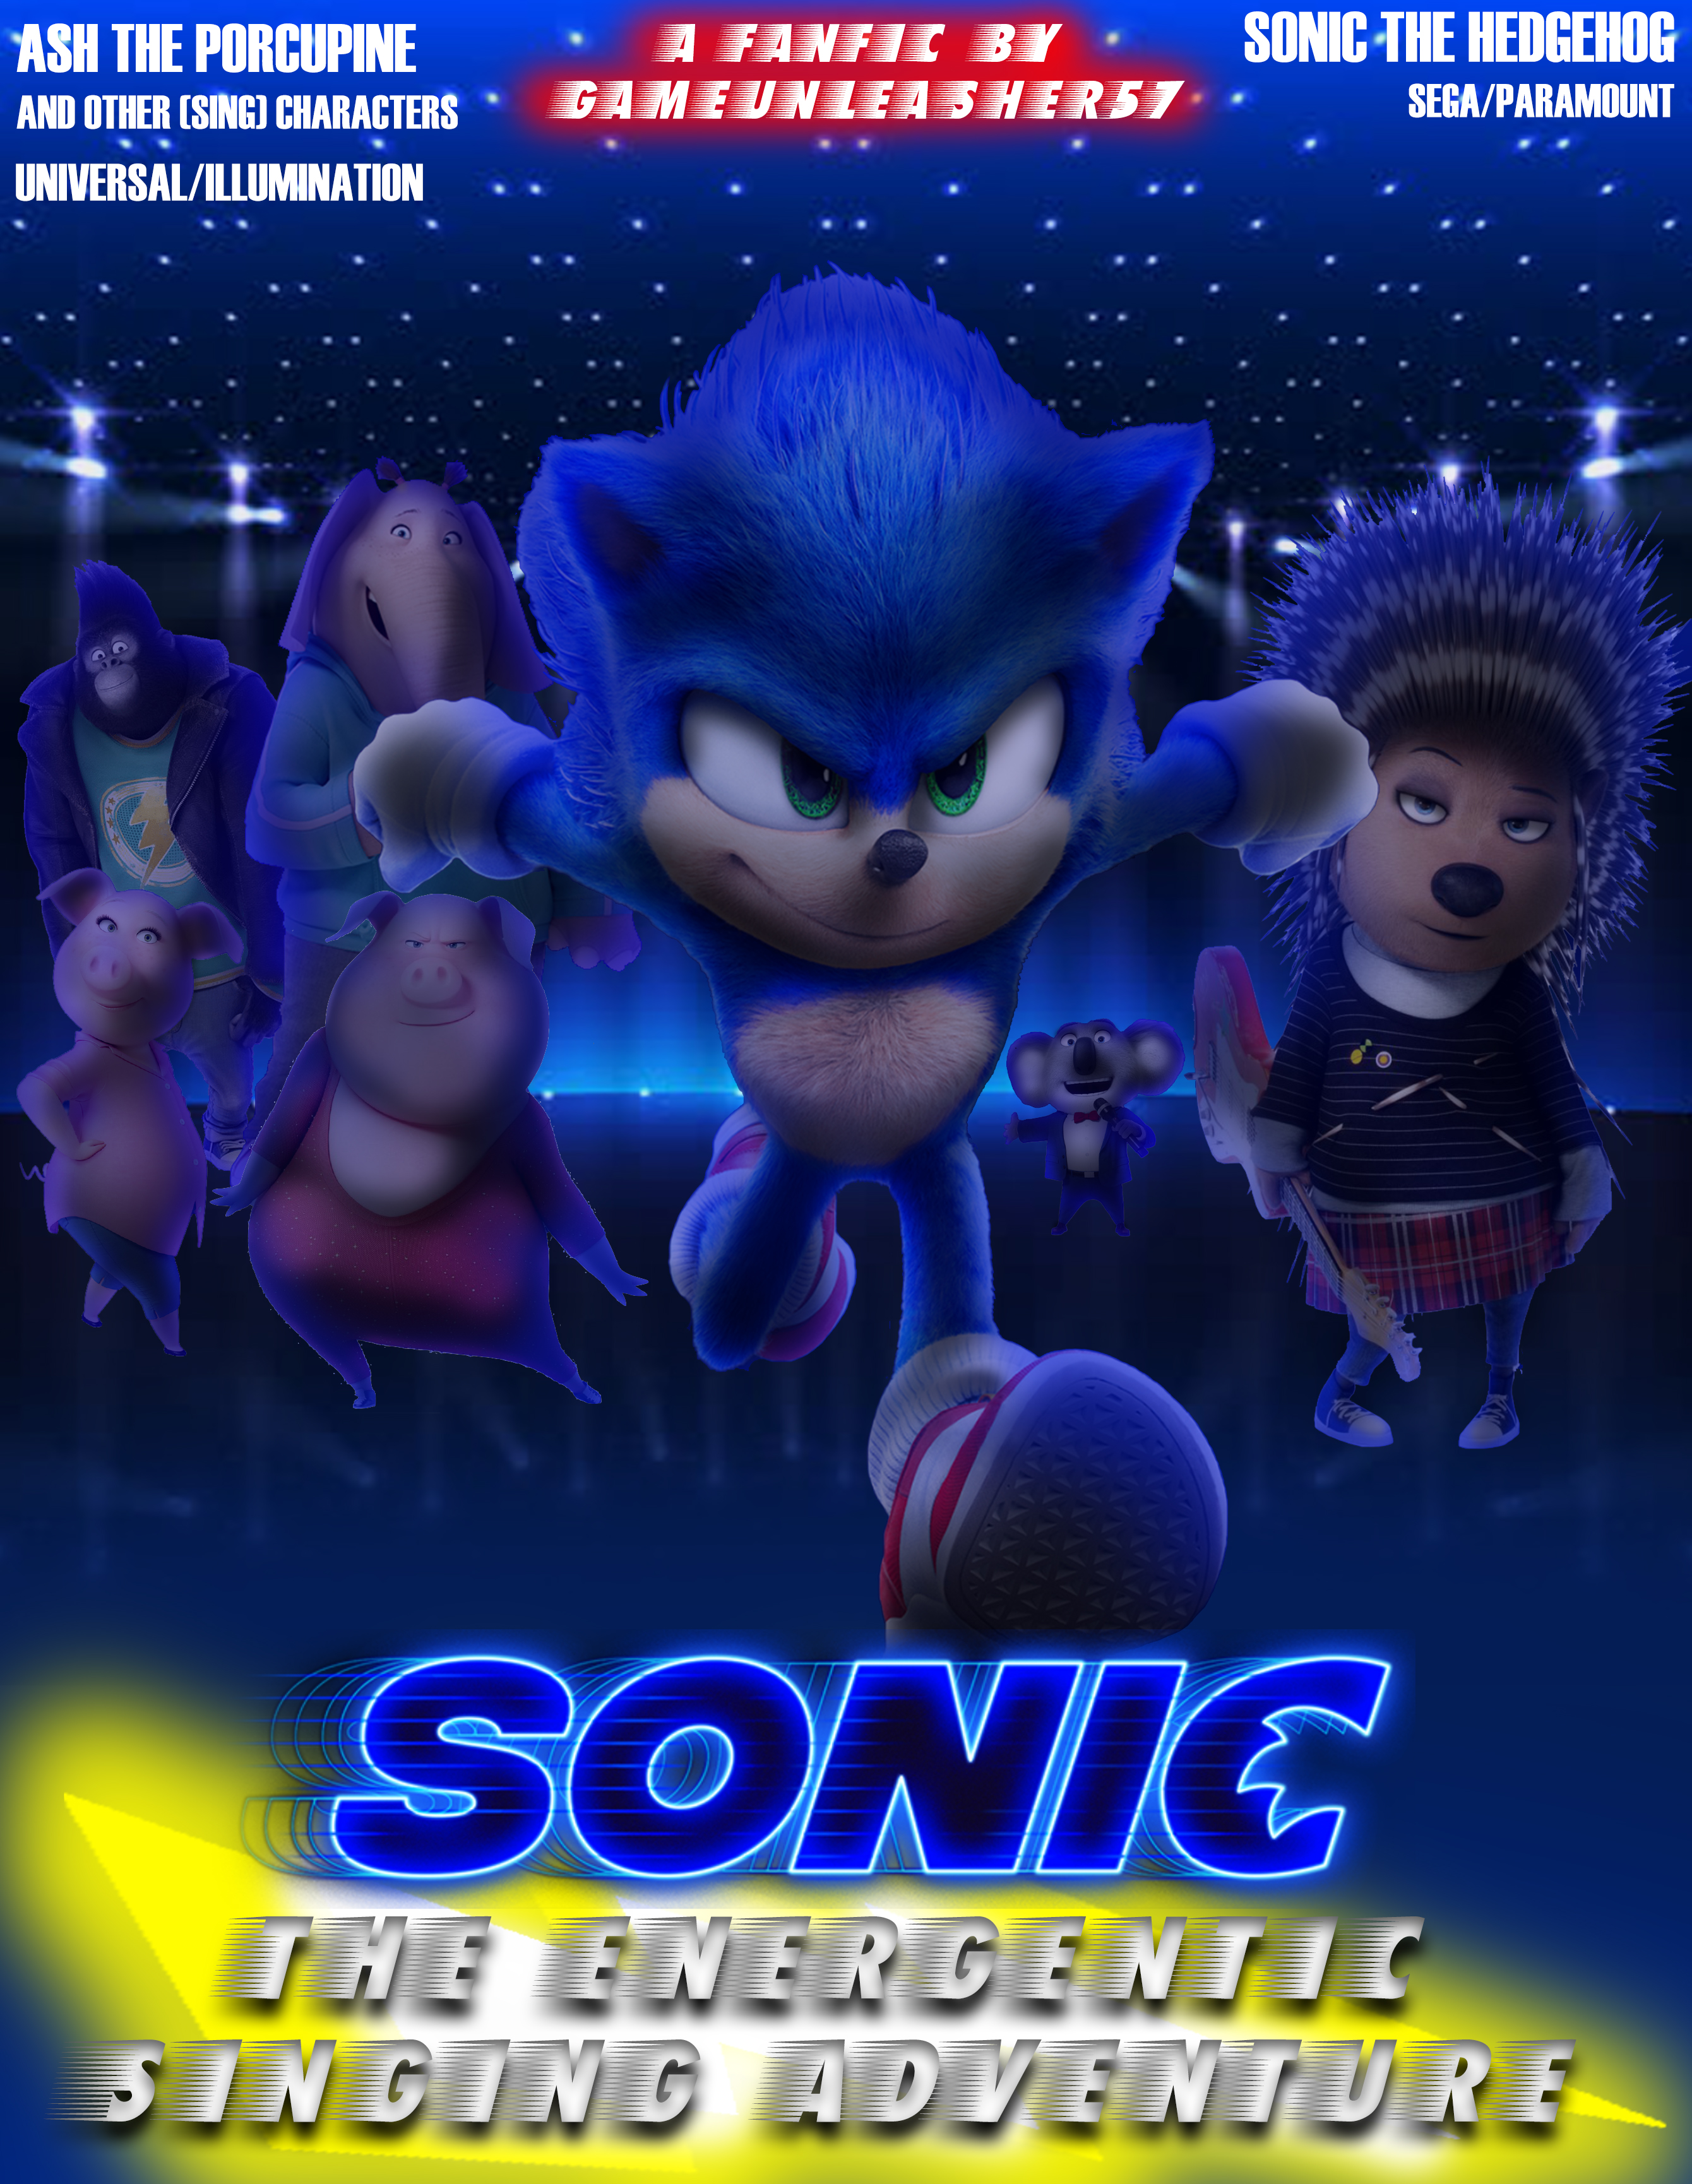 Sonic the hedgehog 3 ( fan poster) by jalonct on DeviantArt